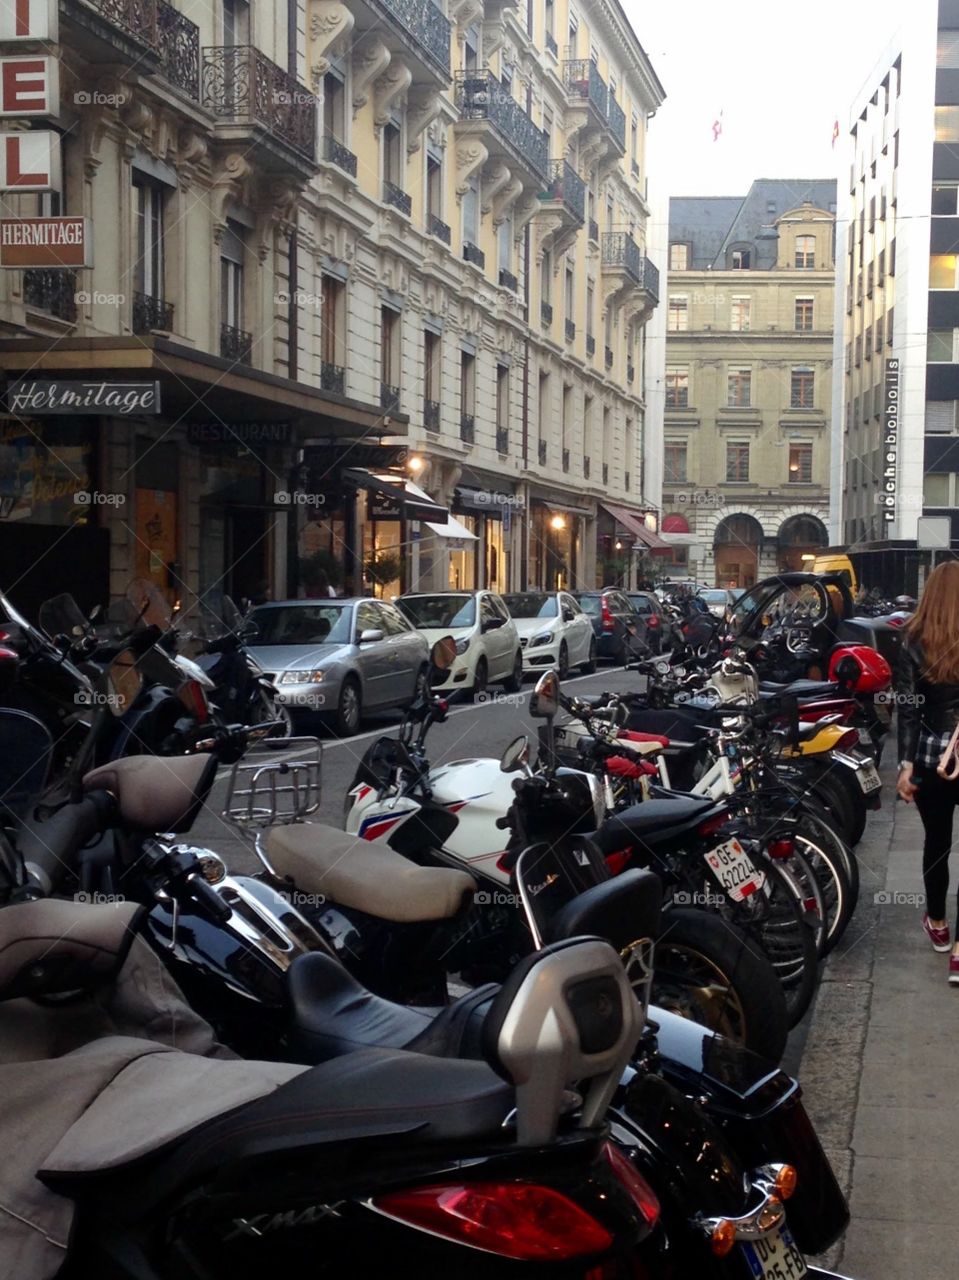 Motorcycles on the street